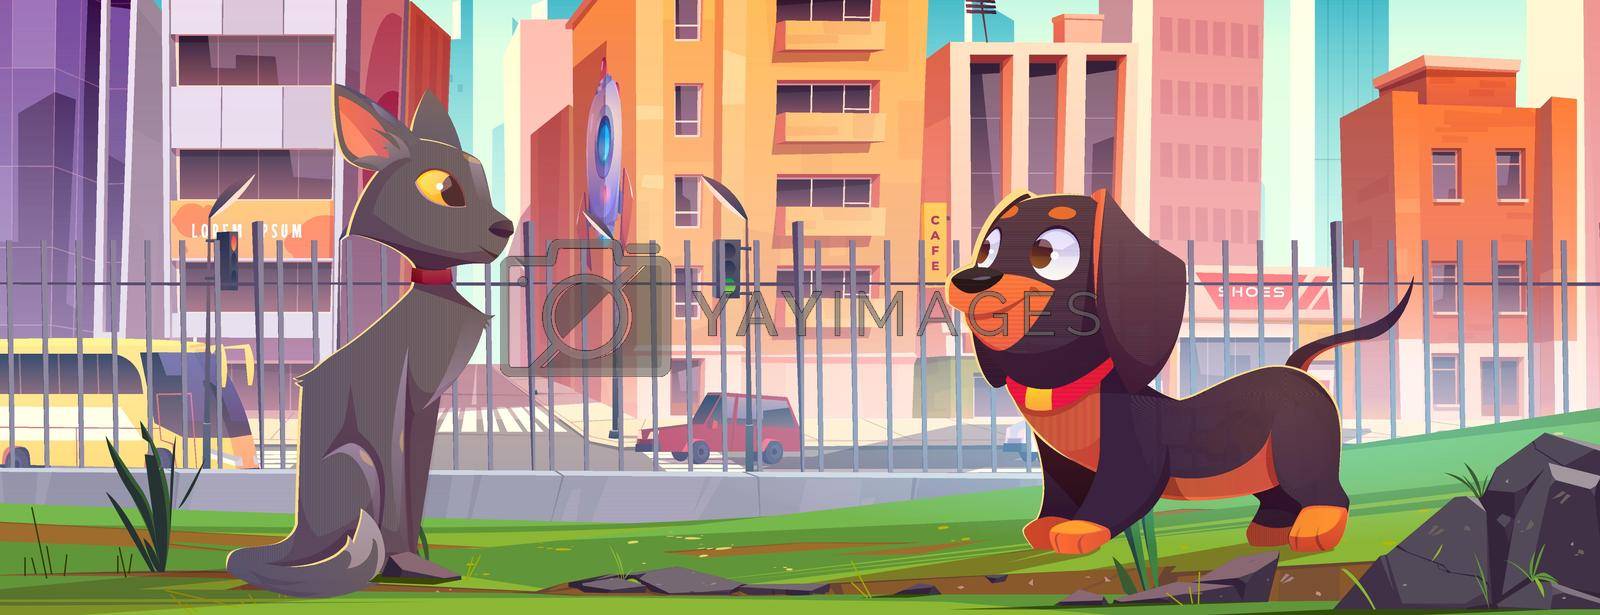 Pets walk in city park. Cute cat and dog meet together on green lawn. Vector cartoon illustration of adorable home animals on backyard with green grass and fence and town street with houses and cars